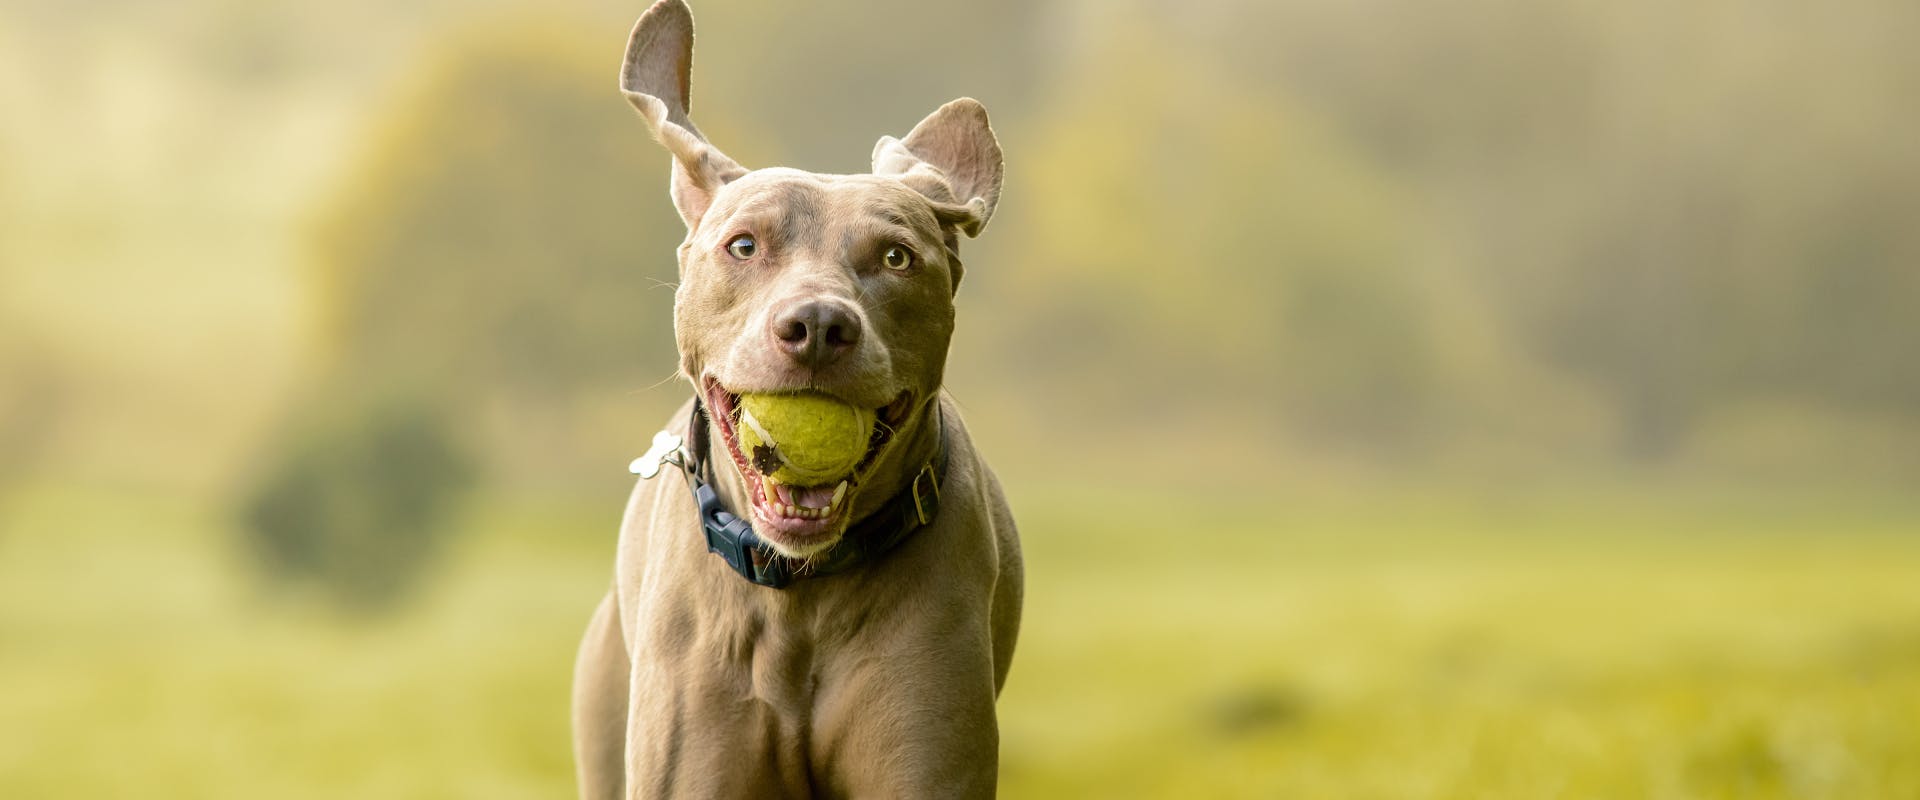 large gray dog running in a park with a tennis ball in its mouth